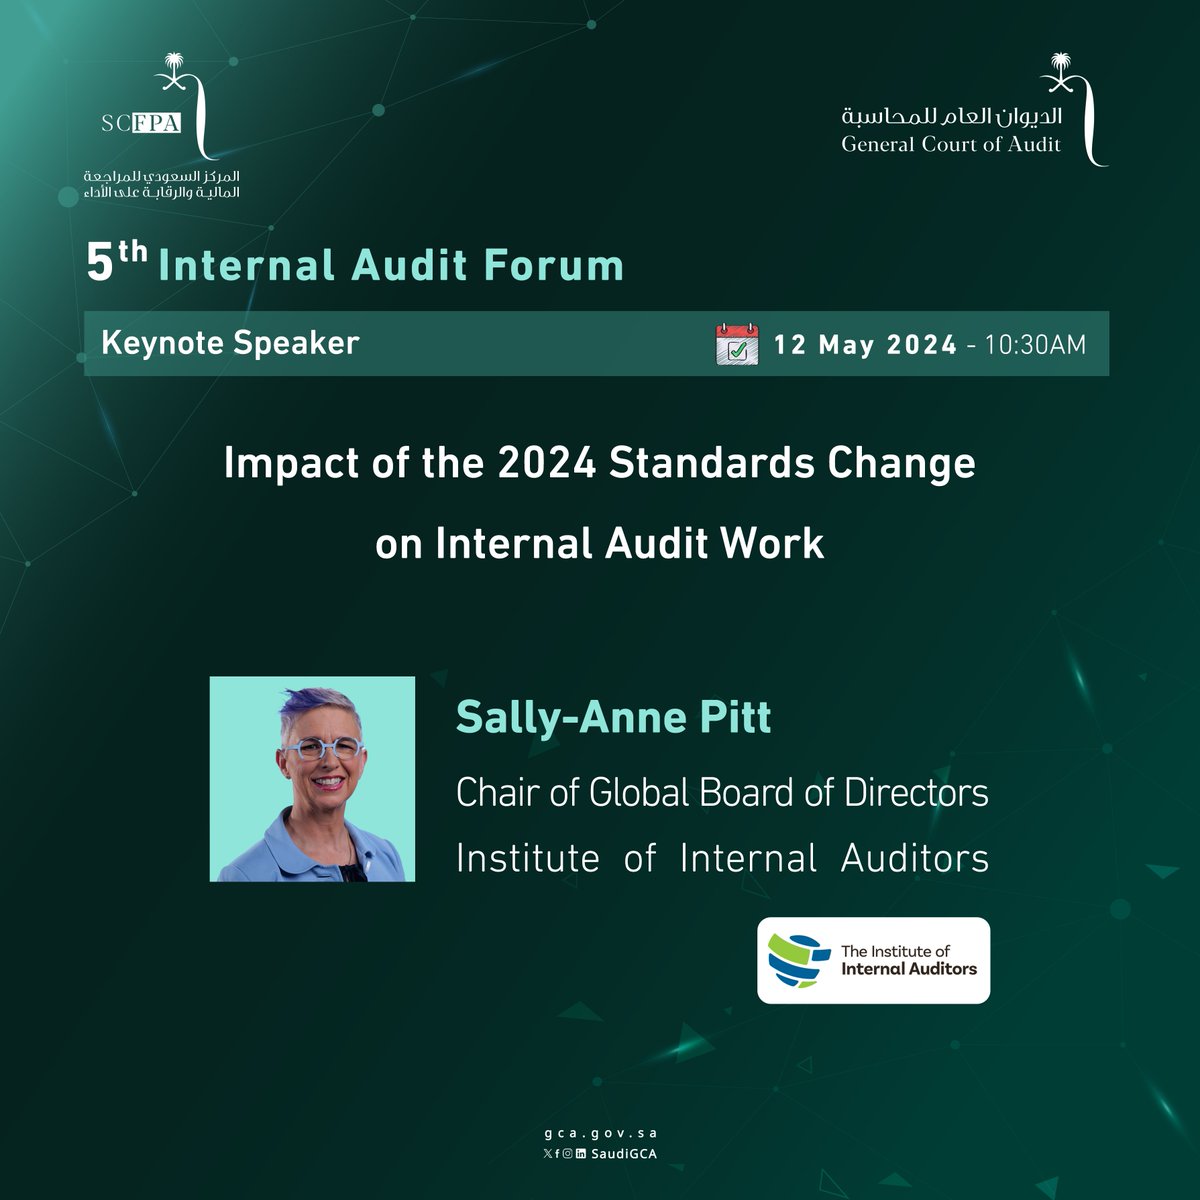 The Chair of the Board of Directors of @theIIA will discuss “The Impact of the 2024 Standards Change on Internal Audit” during the main session of the Internal Audit Forum.

#General_Court_of_Audit